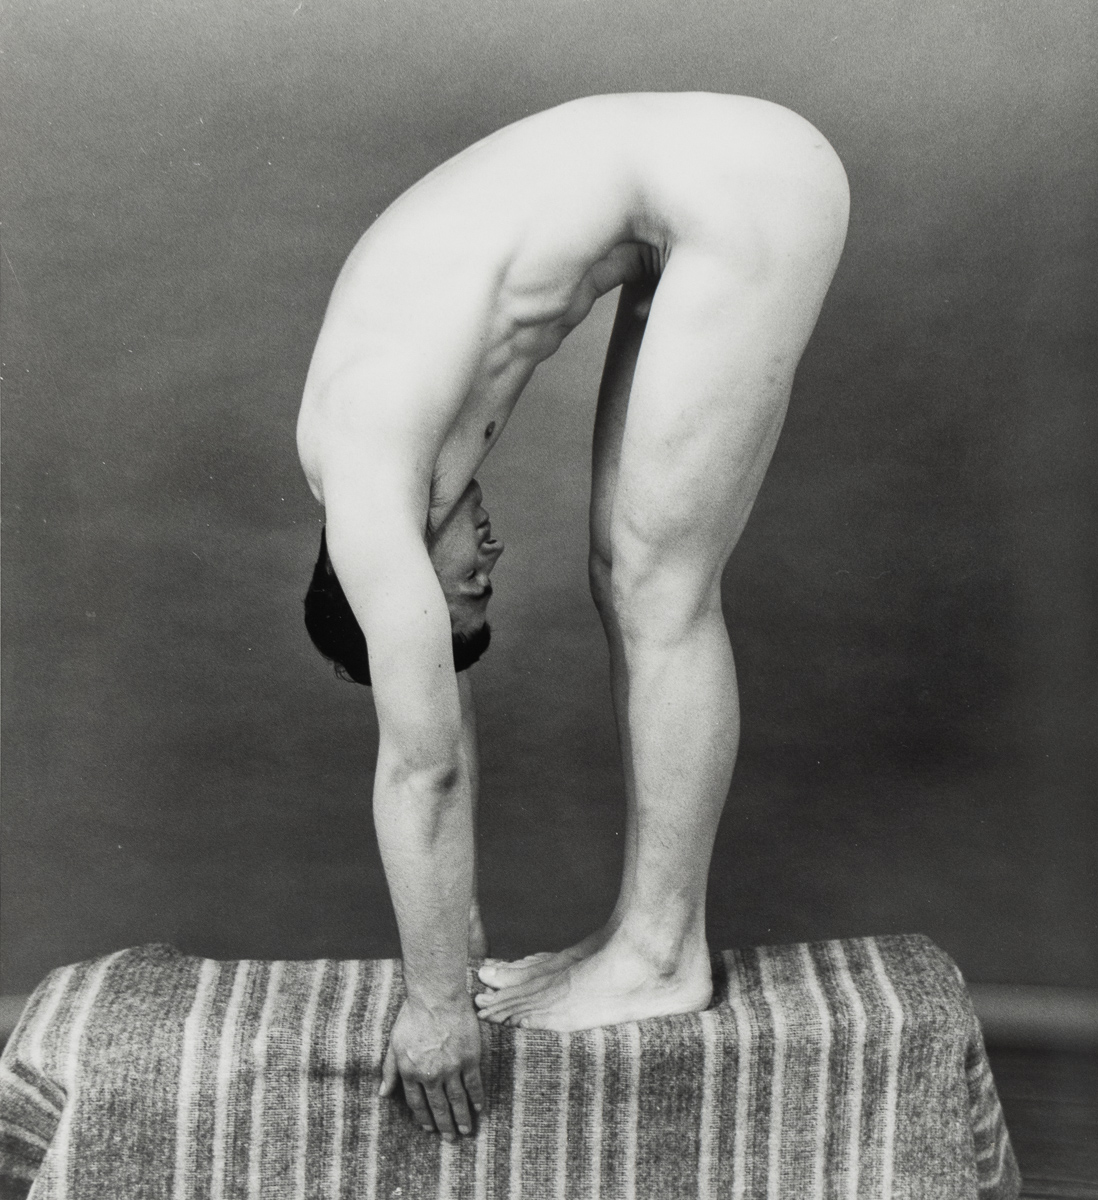 a man bending over on a piece of cloth